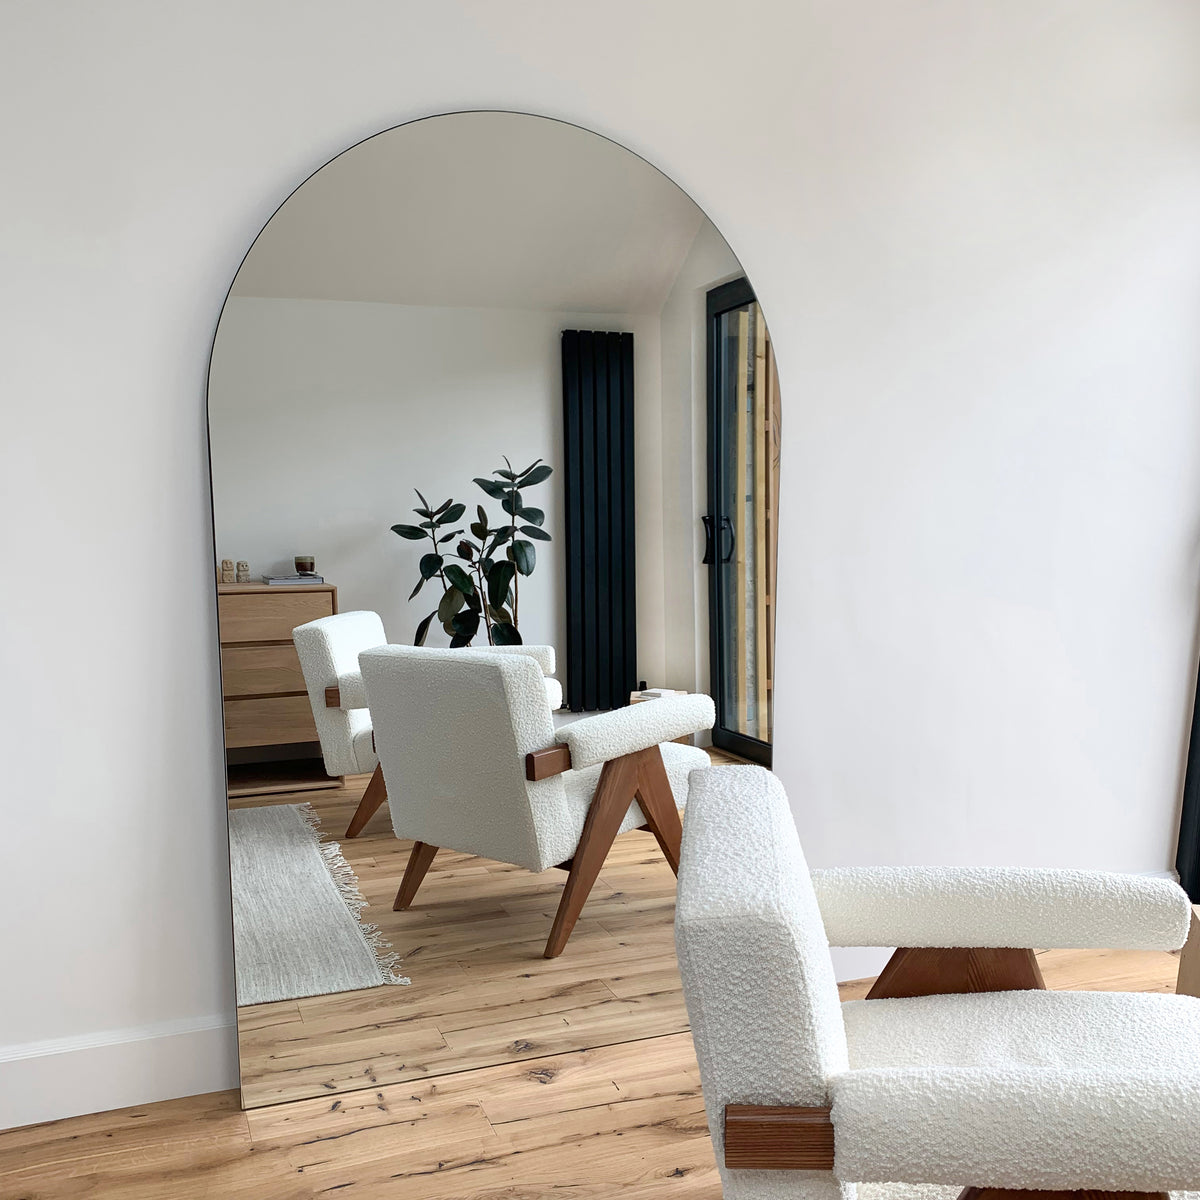 Extra large frameless arched full length mirror